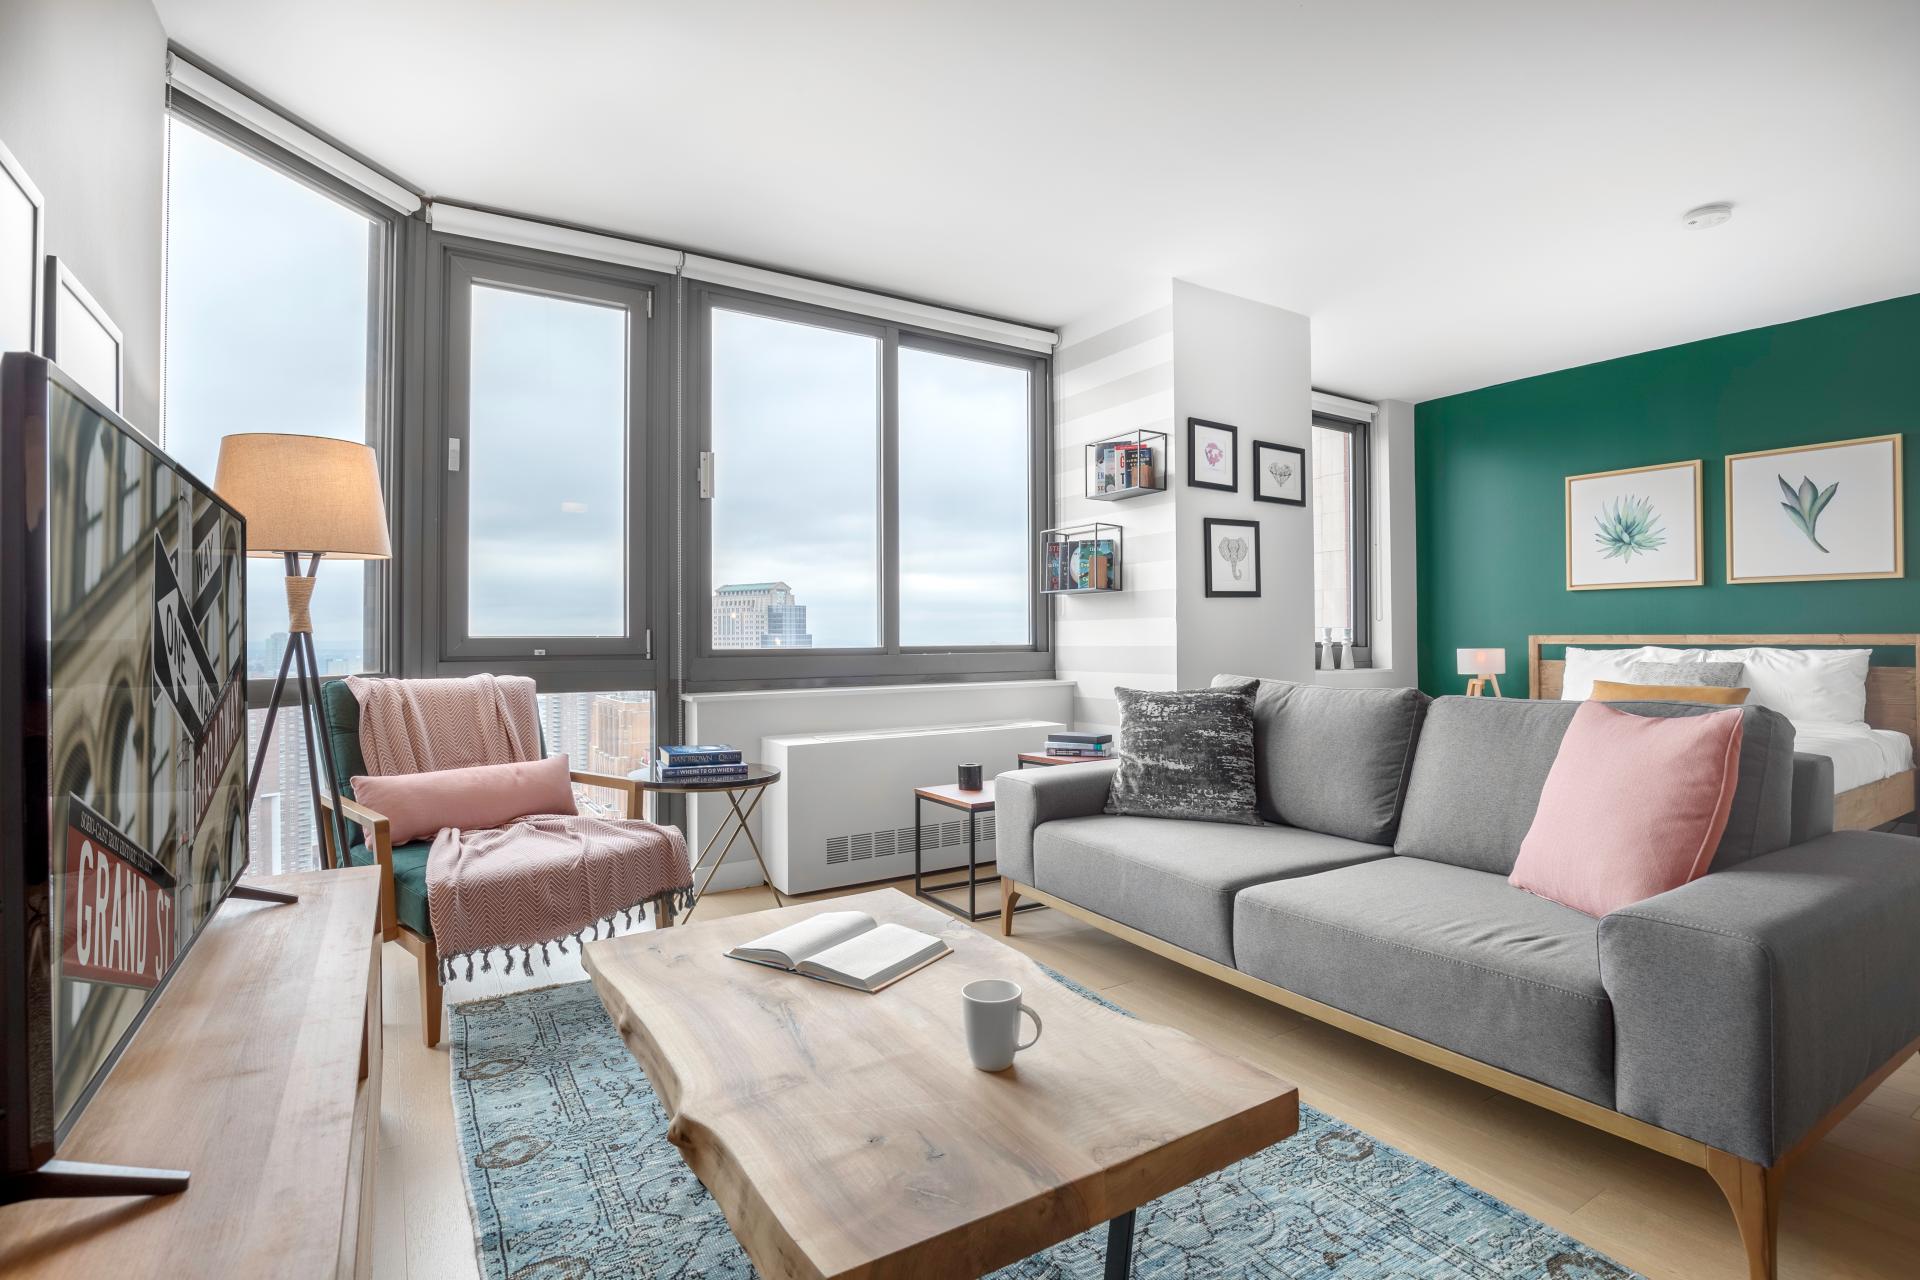 A studio apartment that has been furnished and managed by Blueground. There is a grey couch in the center of the room with a wooden coffee table in front, facing the TV. Behind the couch is a large bed and in the corner is an armchair